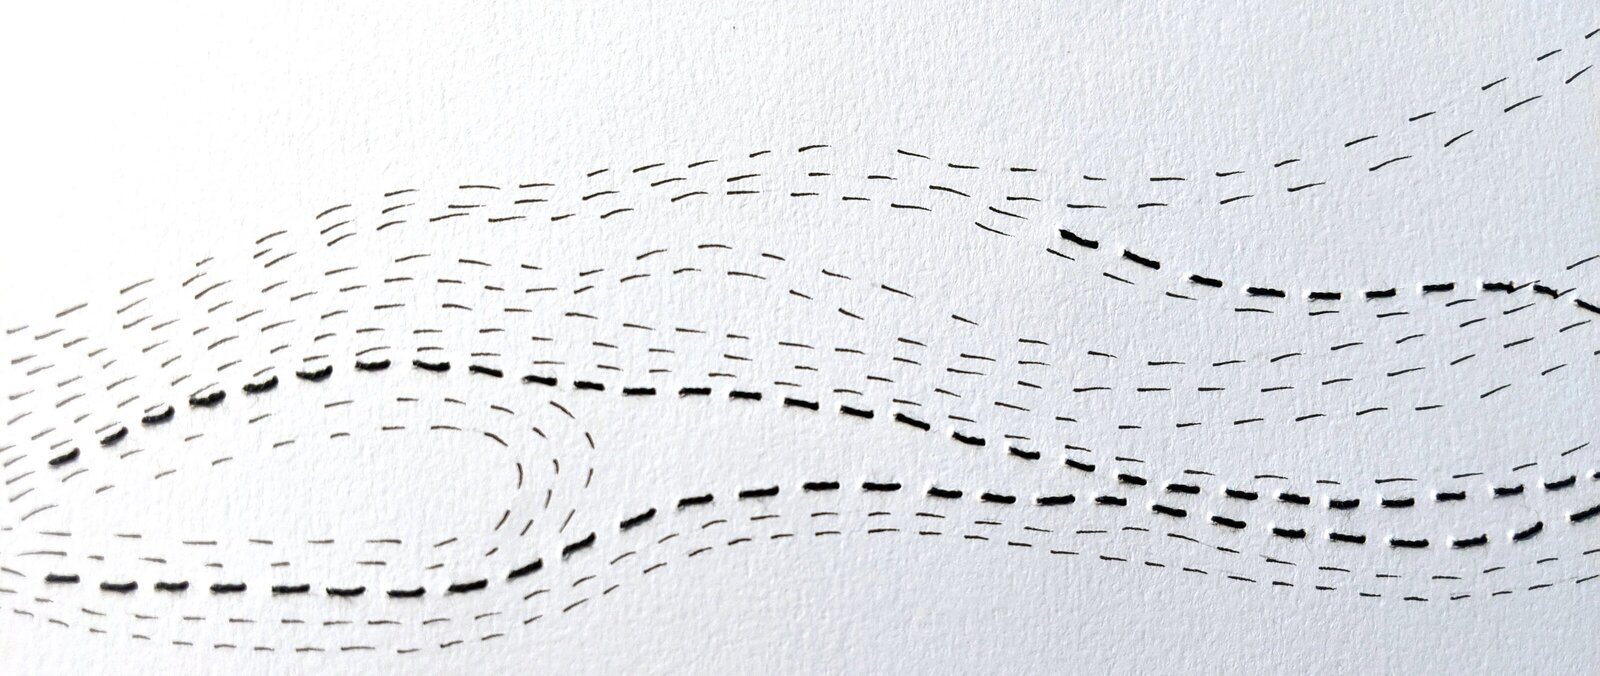 Curving lines of black stitches and black pen marks on white paper. Art by Hannah de Keijzer.